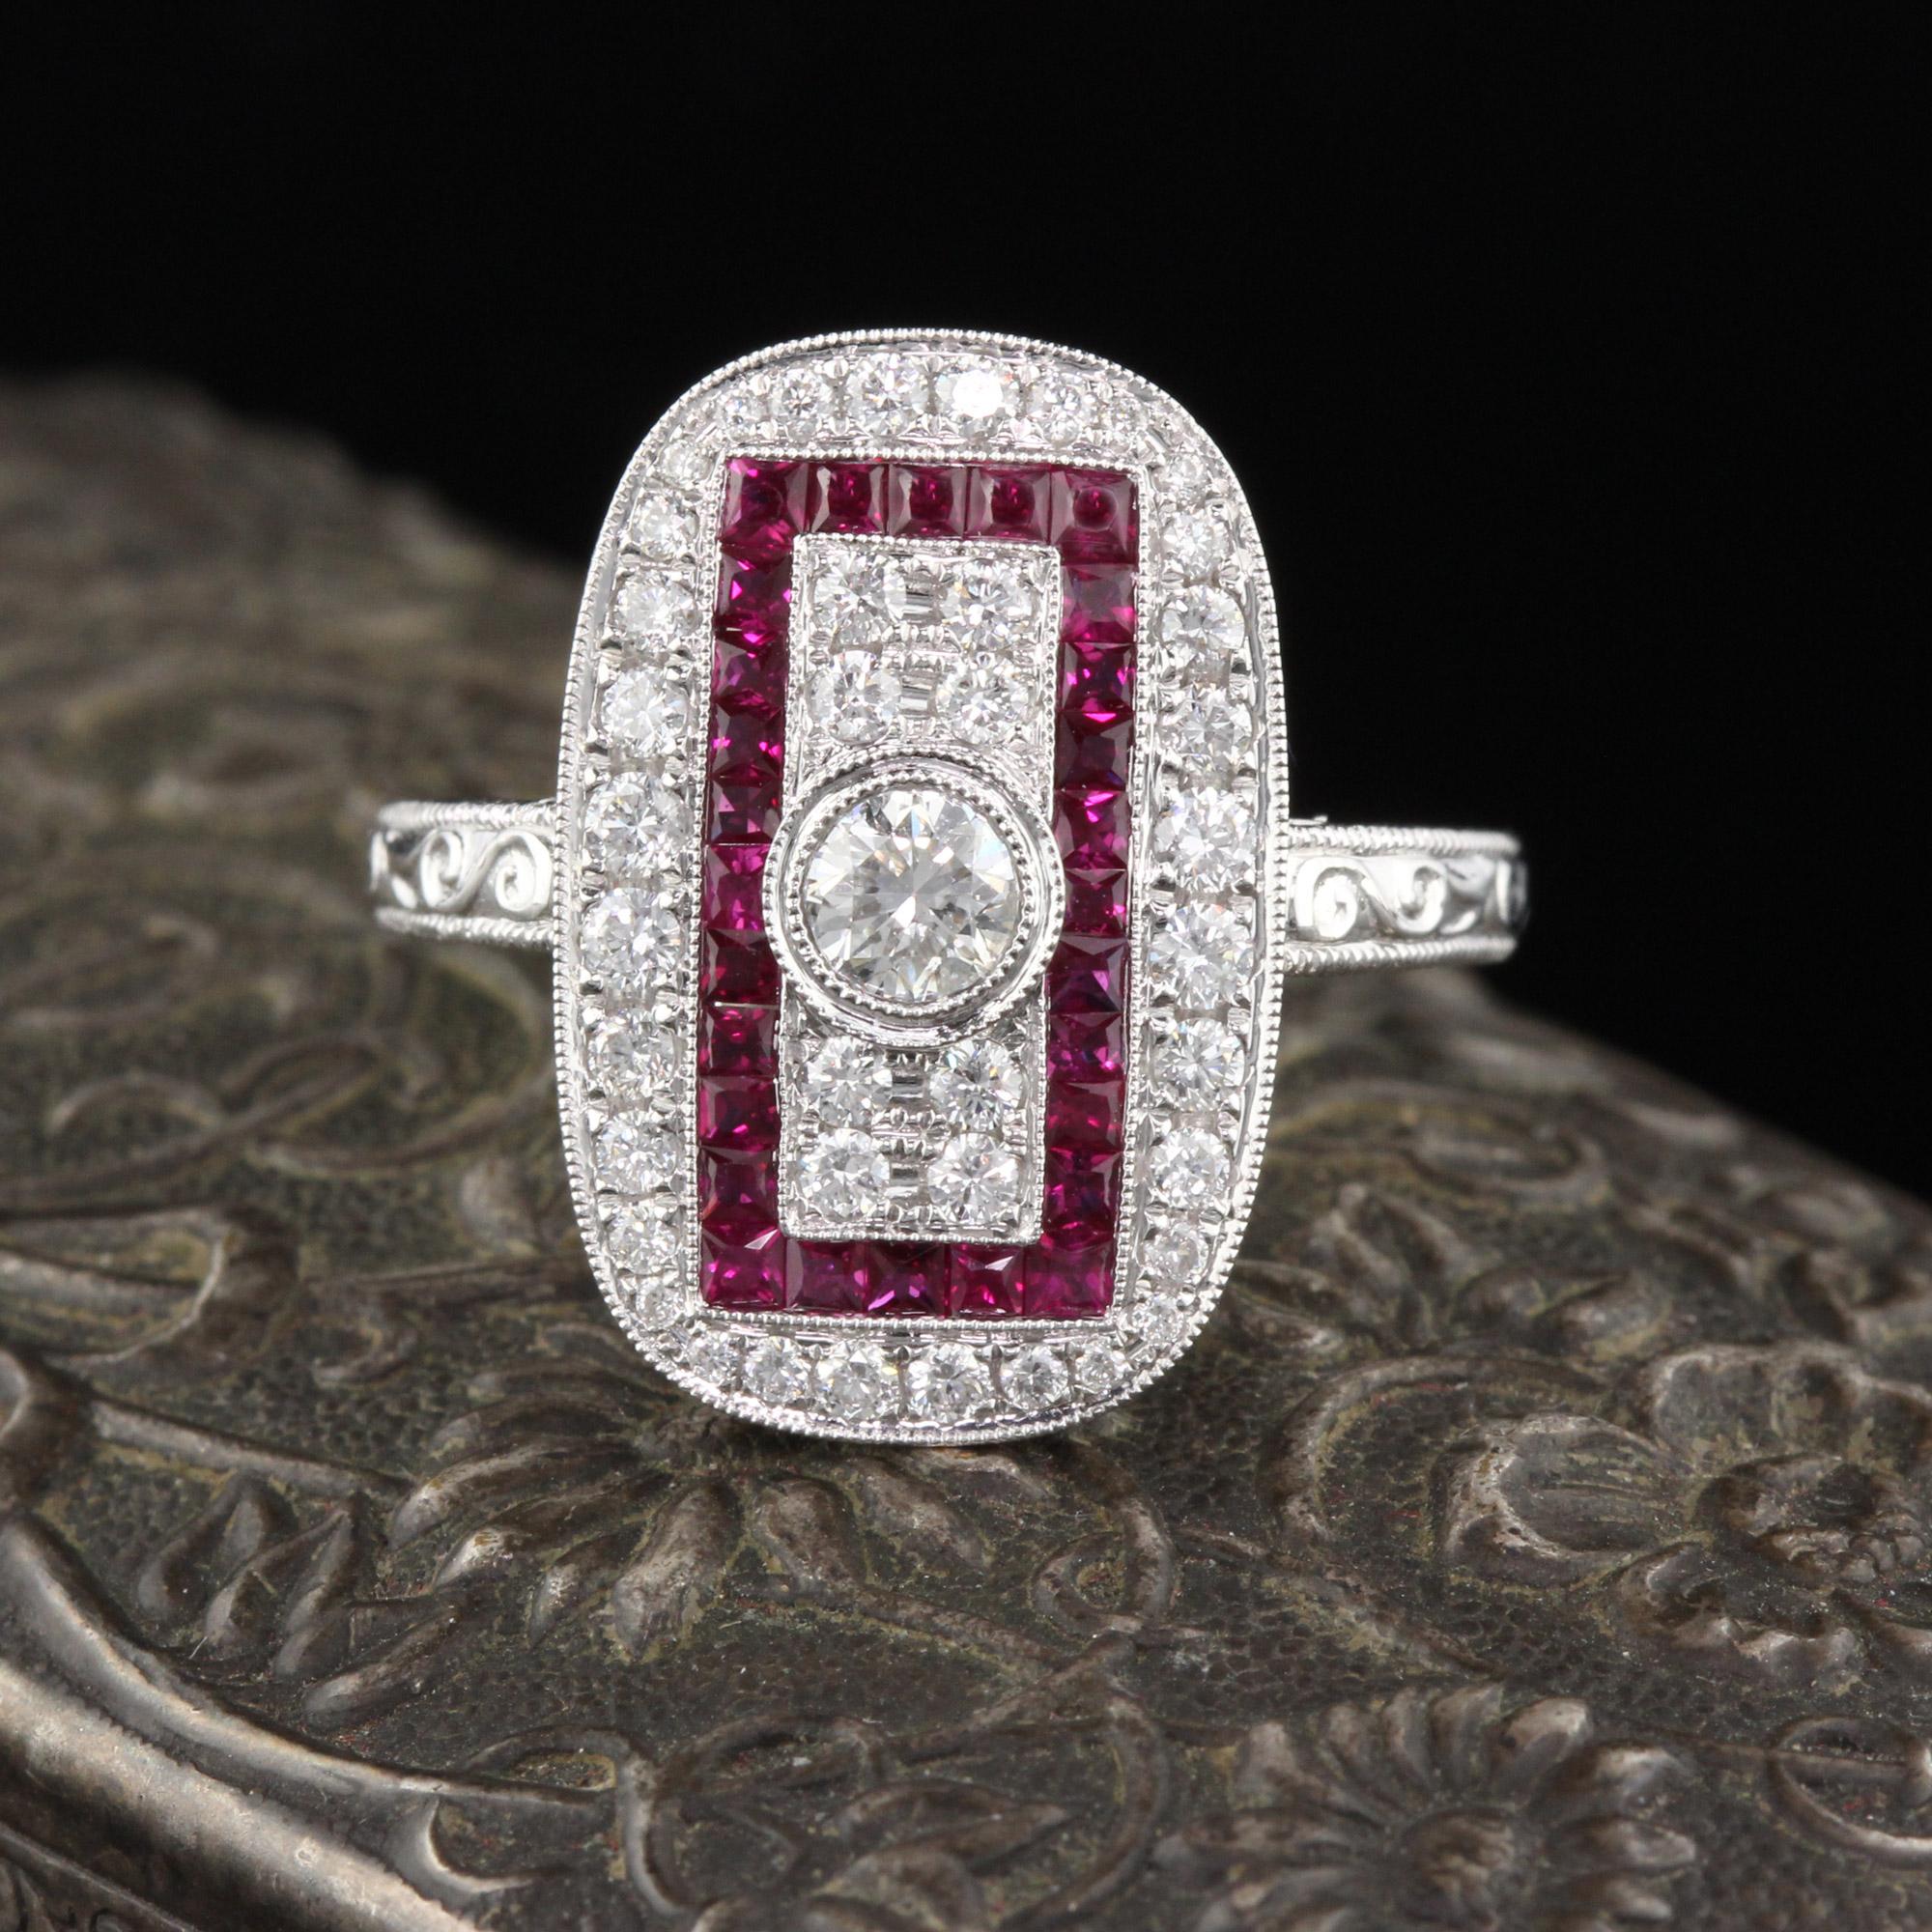 Beautiful Art Deco style ring in 18K White Gold with diamonds and channel set natural rubies! This ring is hand engraved and mil-grained.

Item #R0057

Metal: 18K White Gold

Center Diamond Weight: 0.25 cts 

Total Diamond Weight: 0.76 cts

Diamond